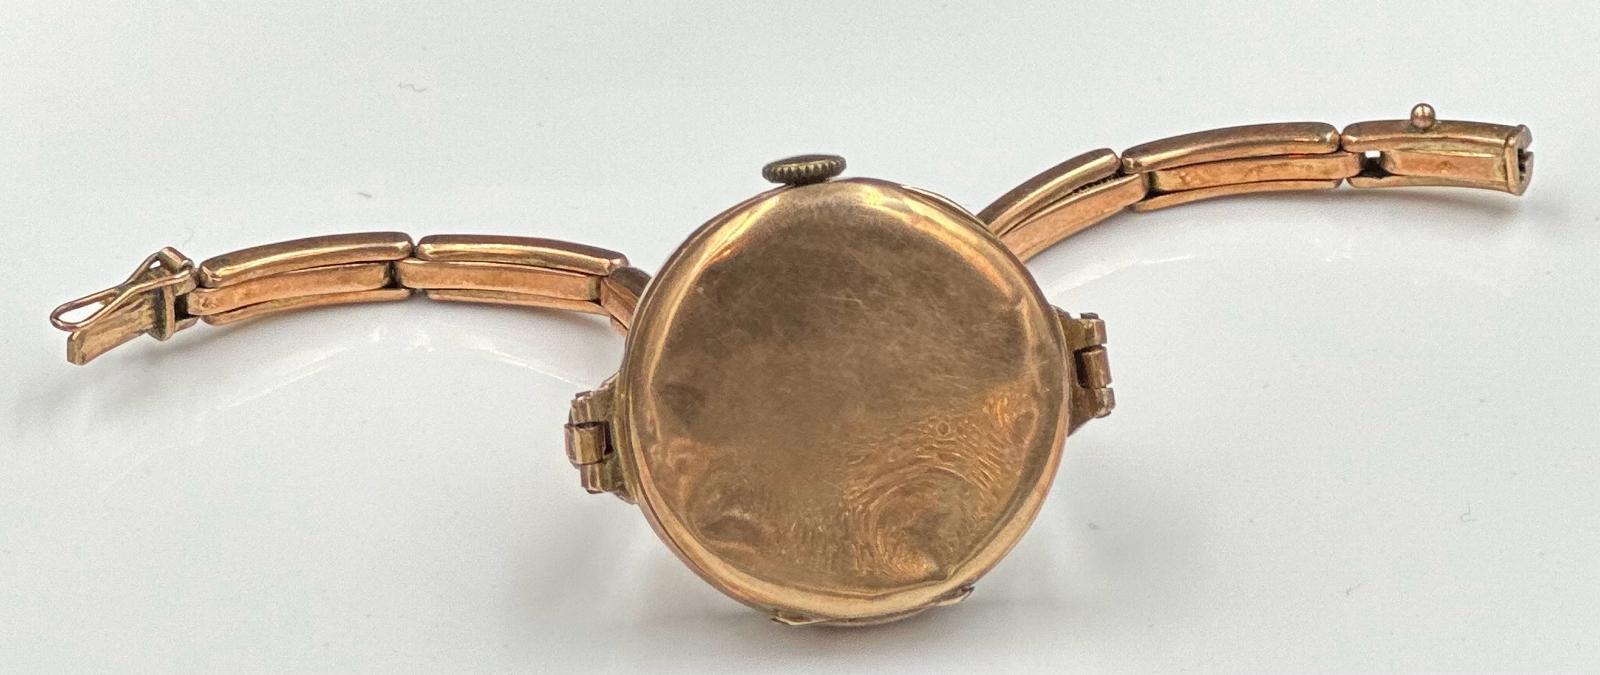 A 9ct gold watch AF with 9ct gold expandable bracelet. Approximate total weight 18.3g - Image 2 of 2